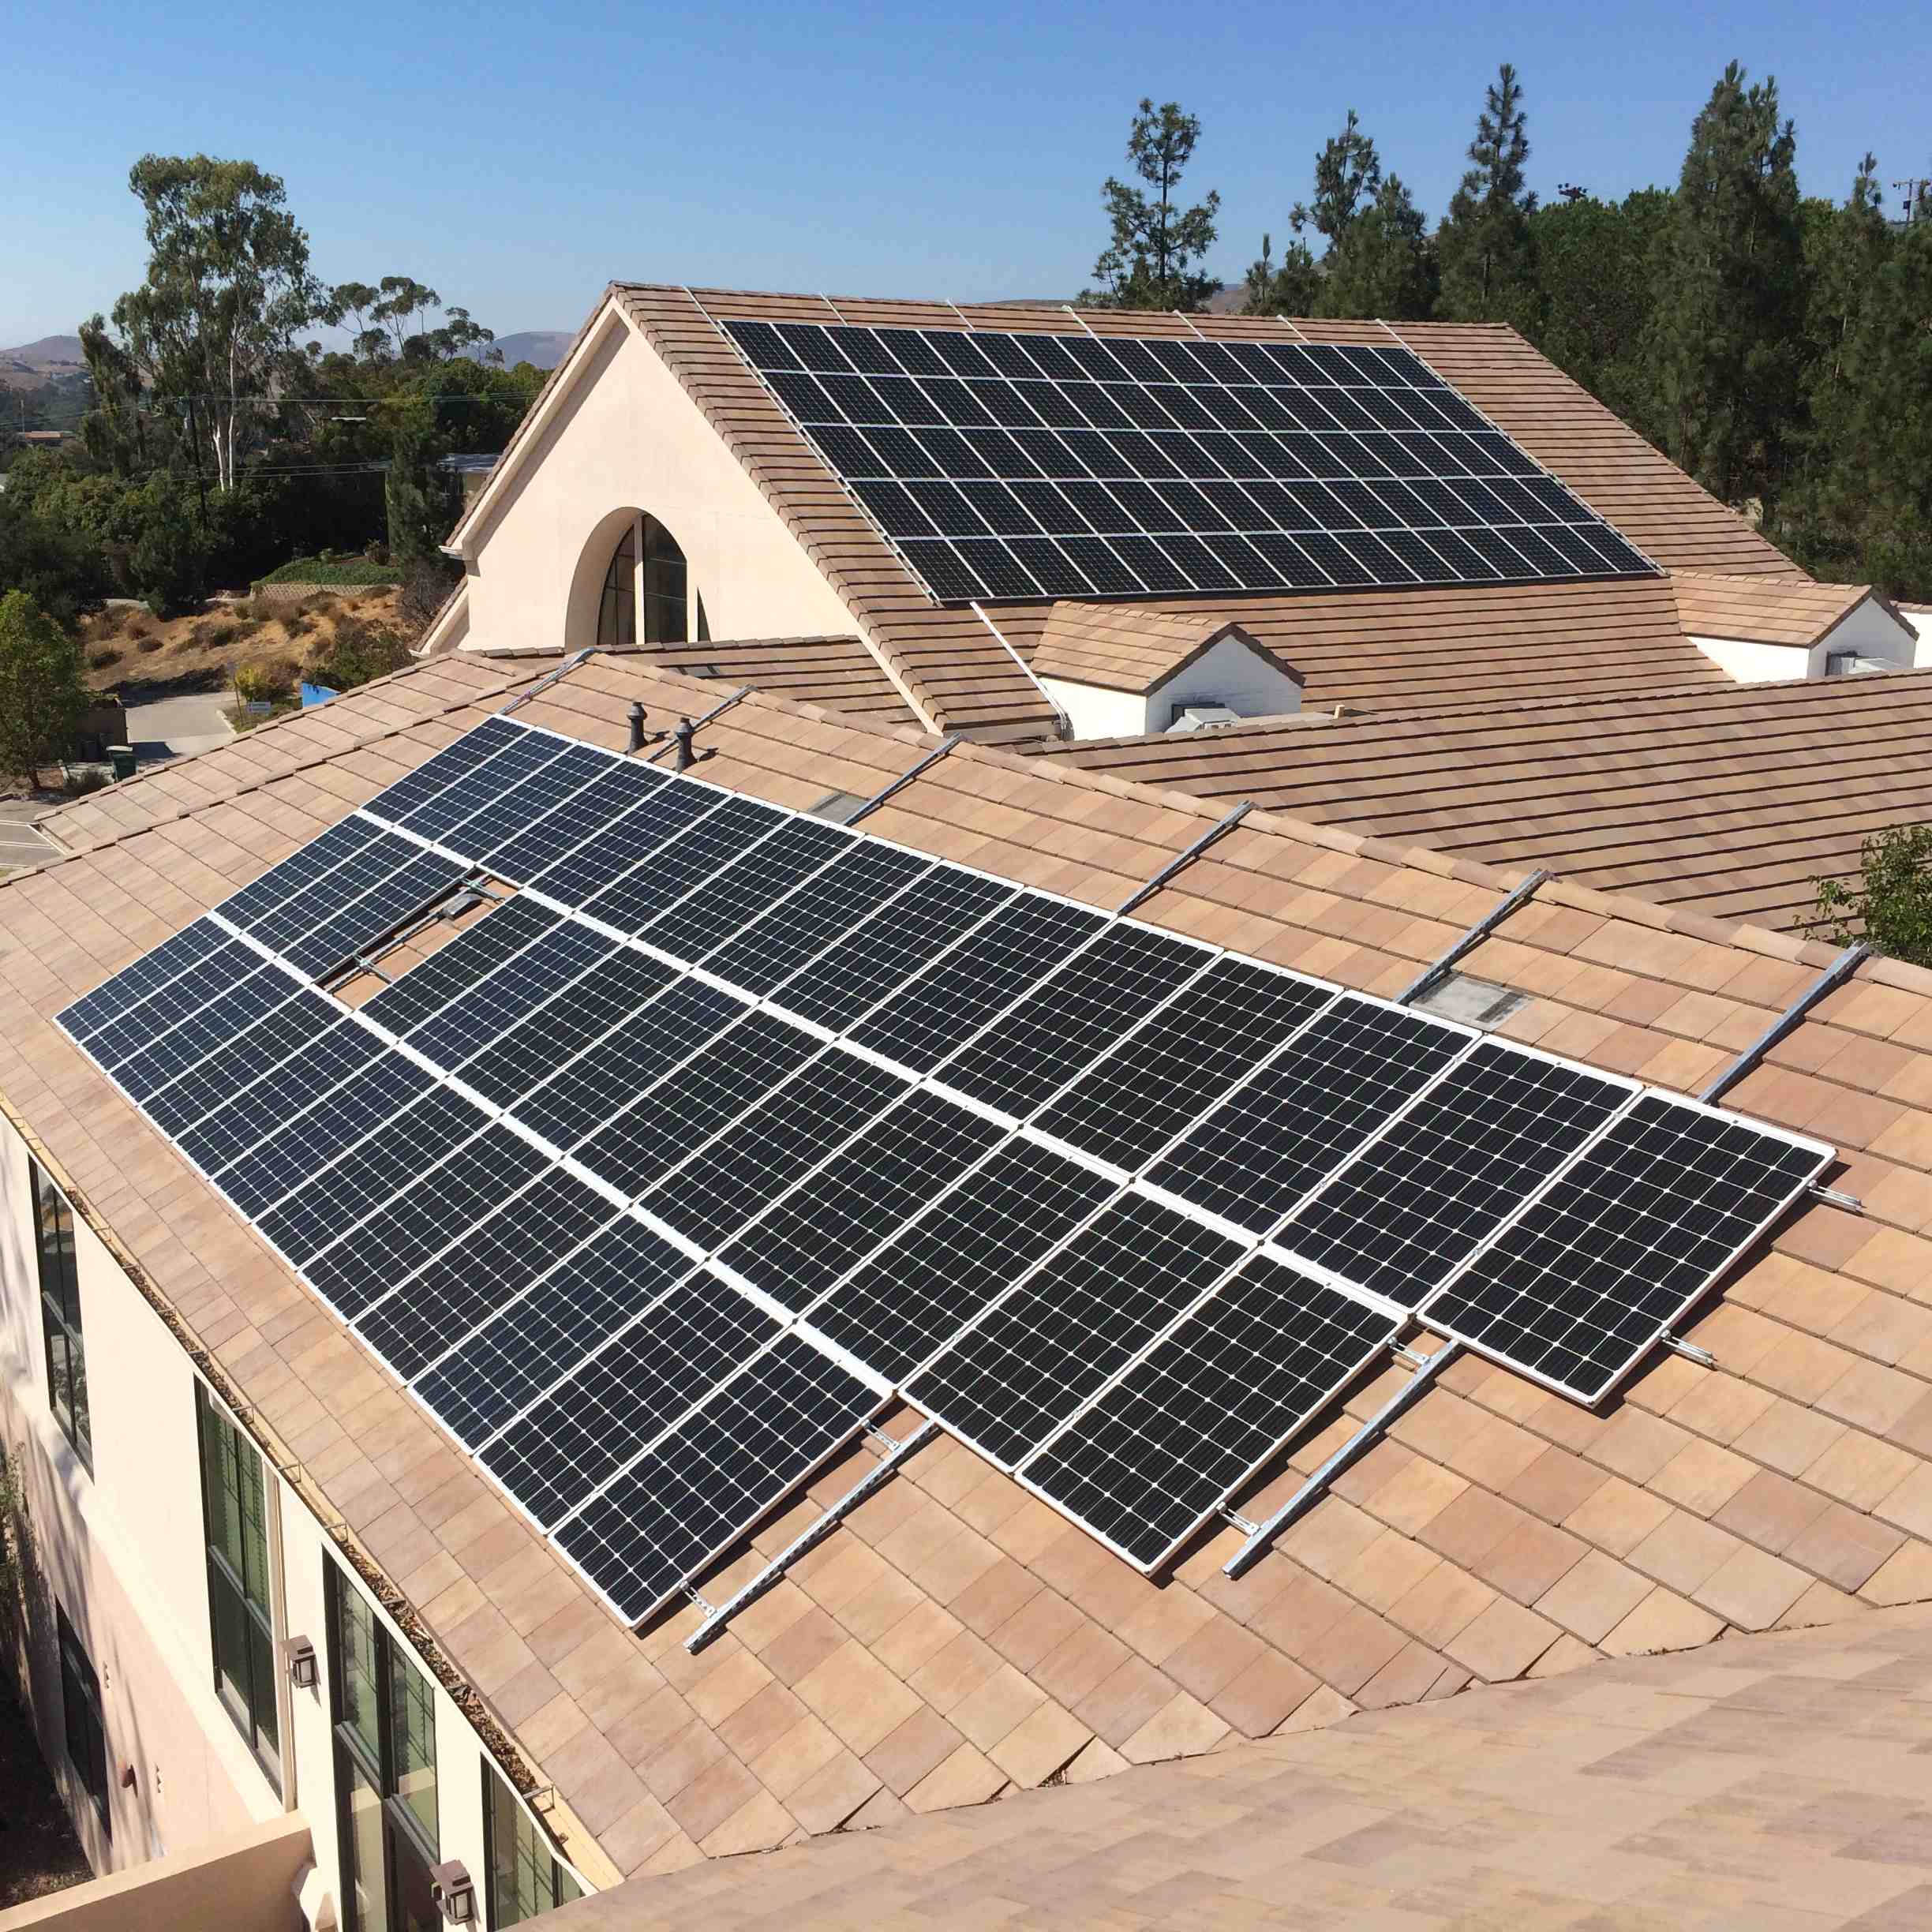 Do solar panels ruin your roof?